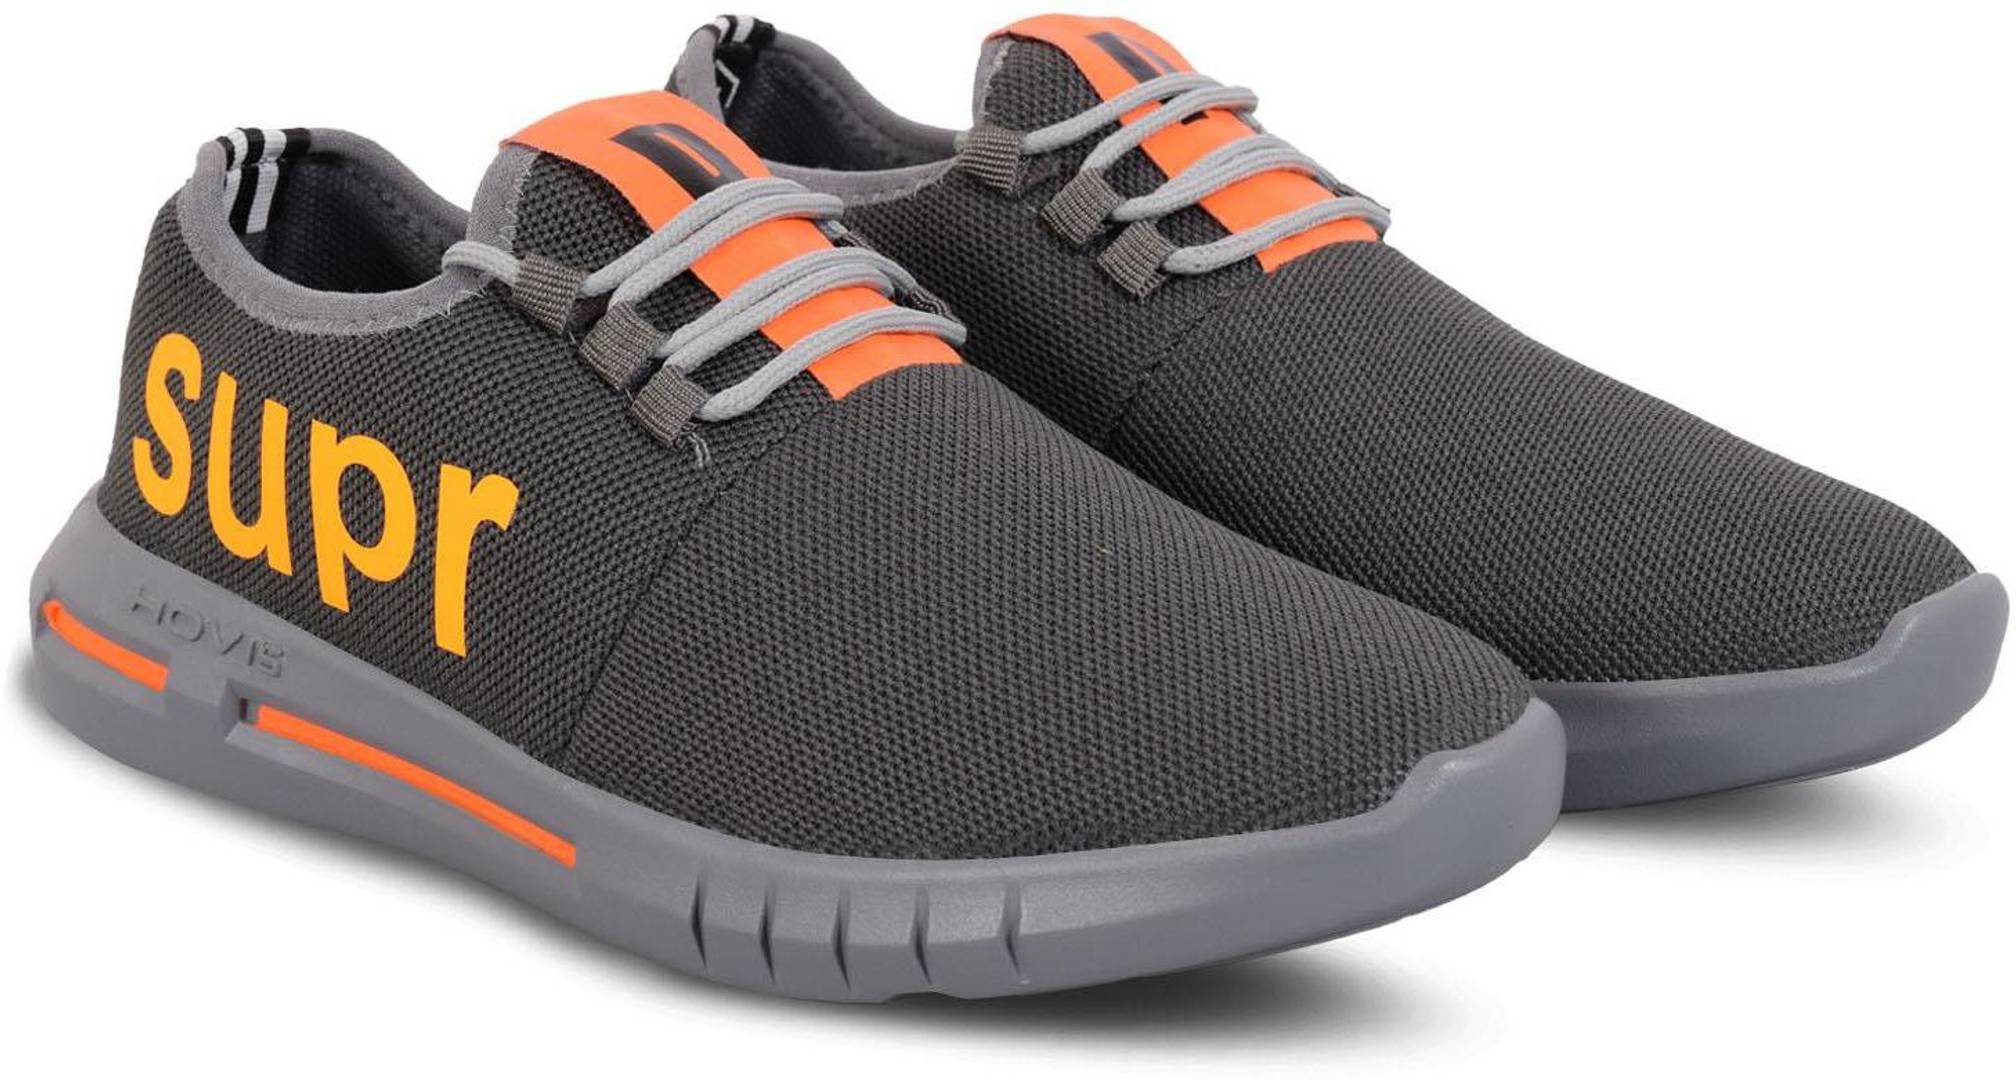 Men's Stylish and Trendy Grey Printed Mesh Casual Sneakers